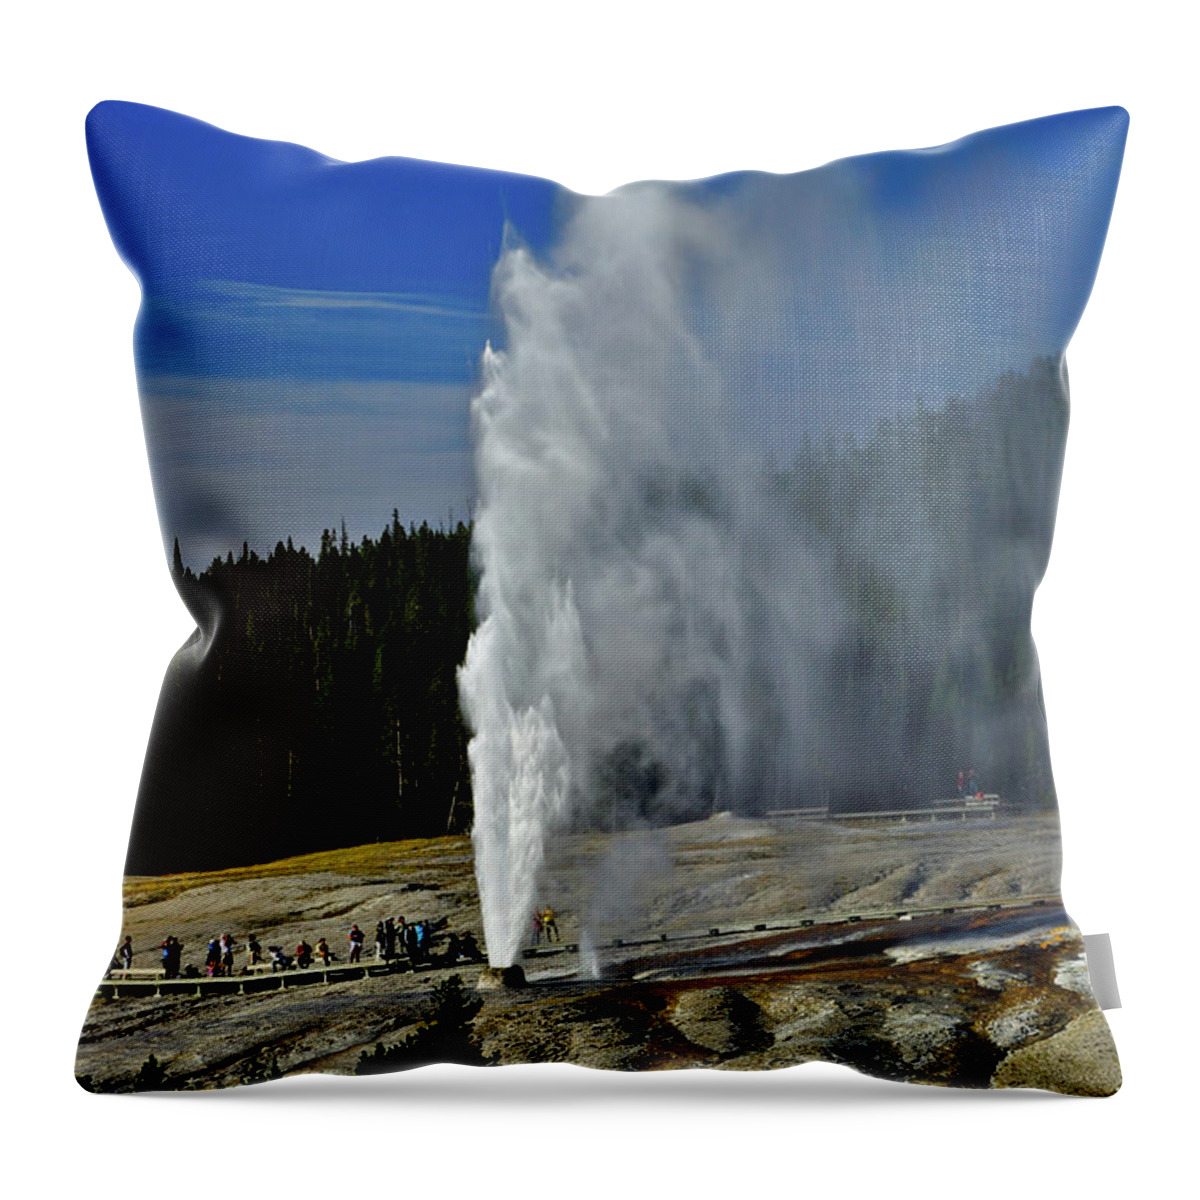 Beehive Geyser Throw Pillow featuring the photograph Beehive Geyser by Greg Norrell